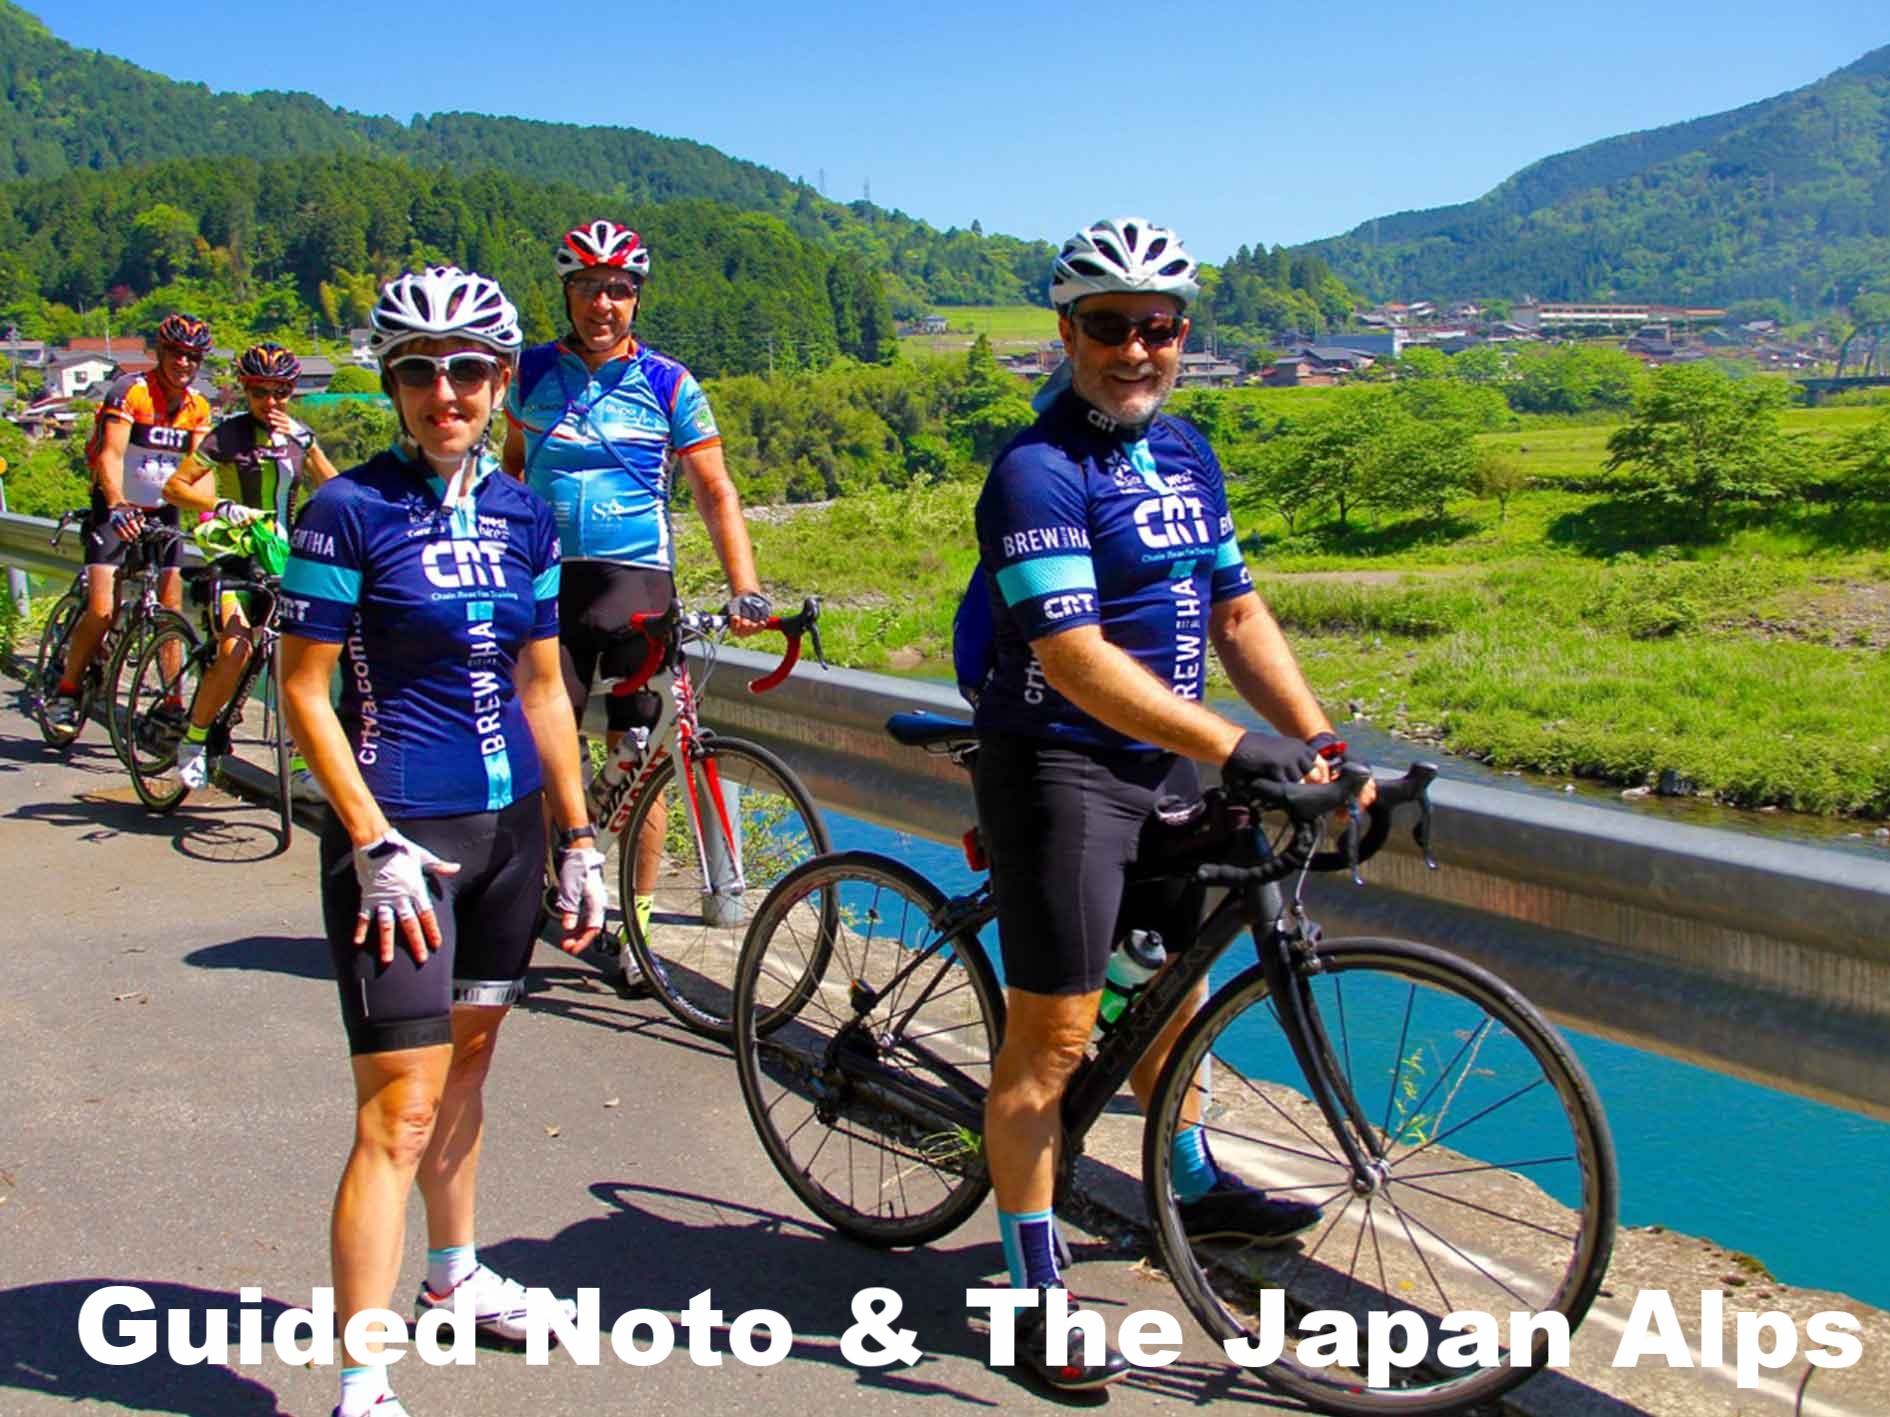 Cycle Tour Noto & The Japan Alps